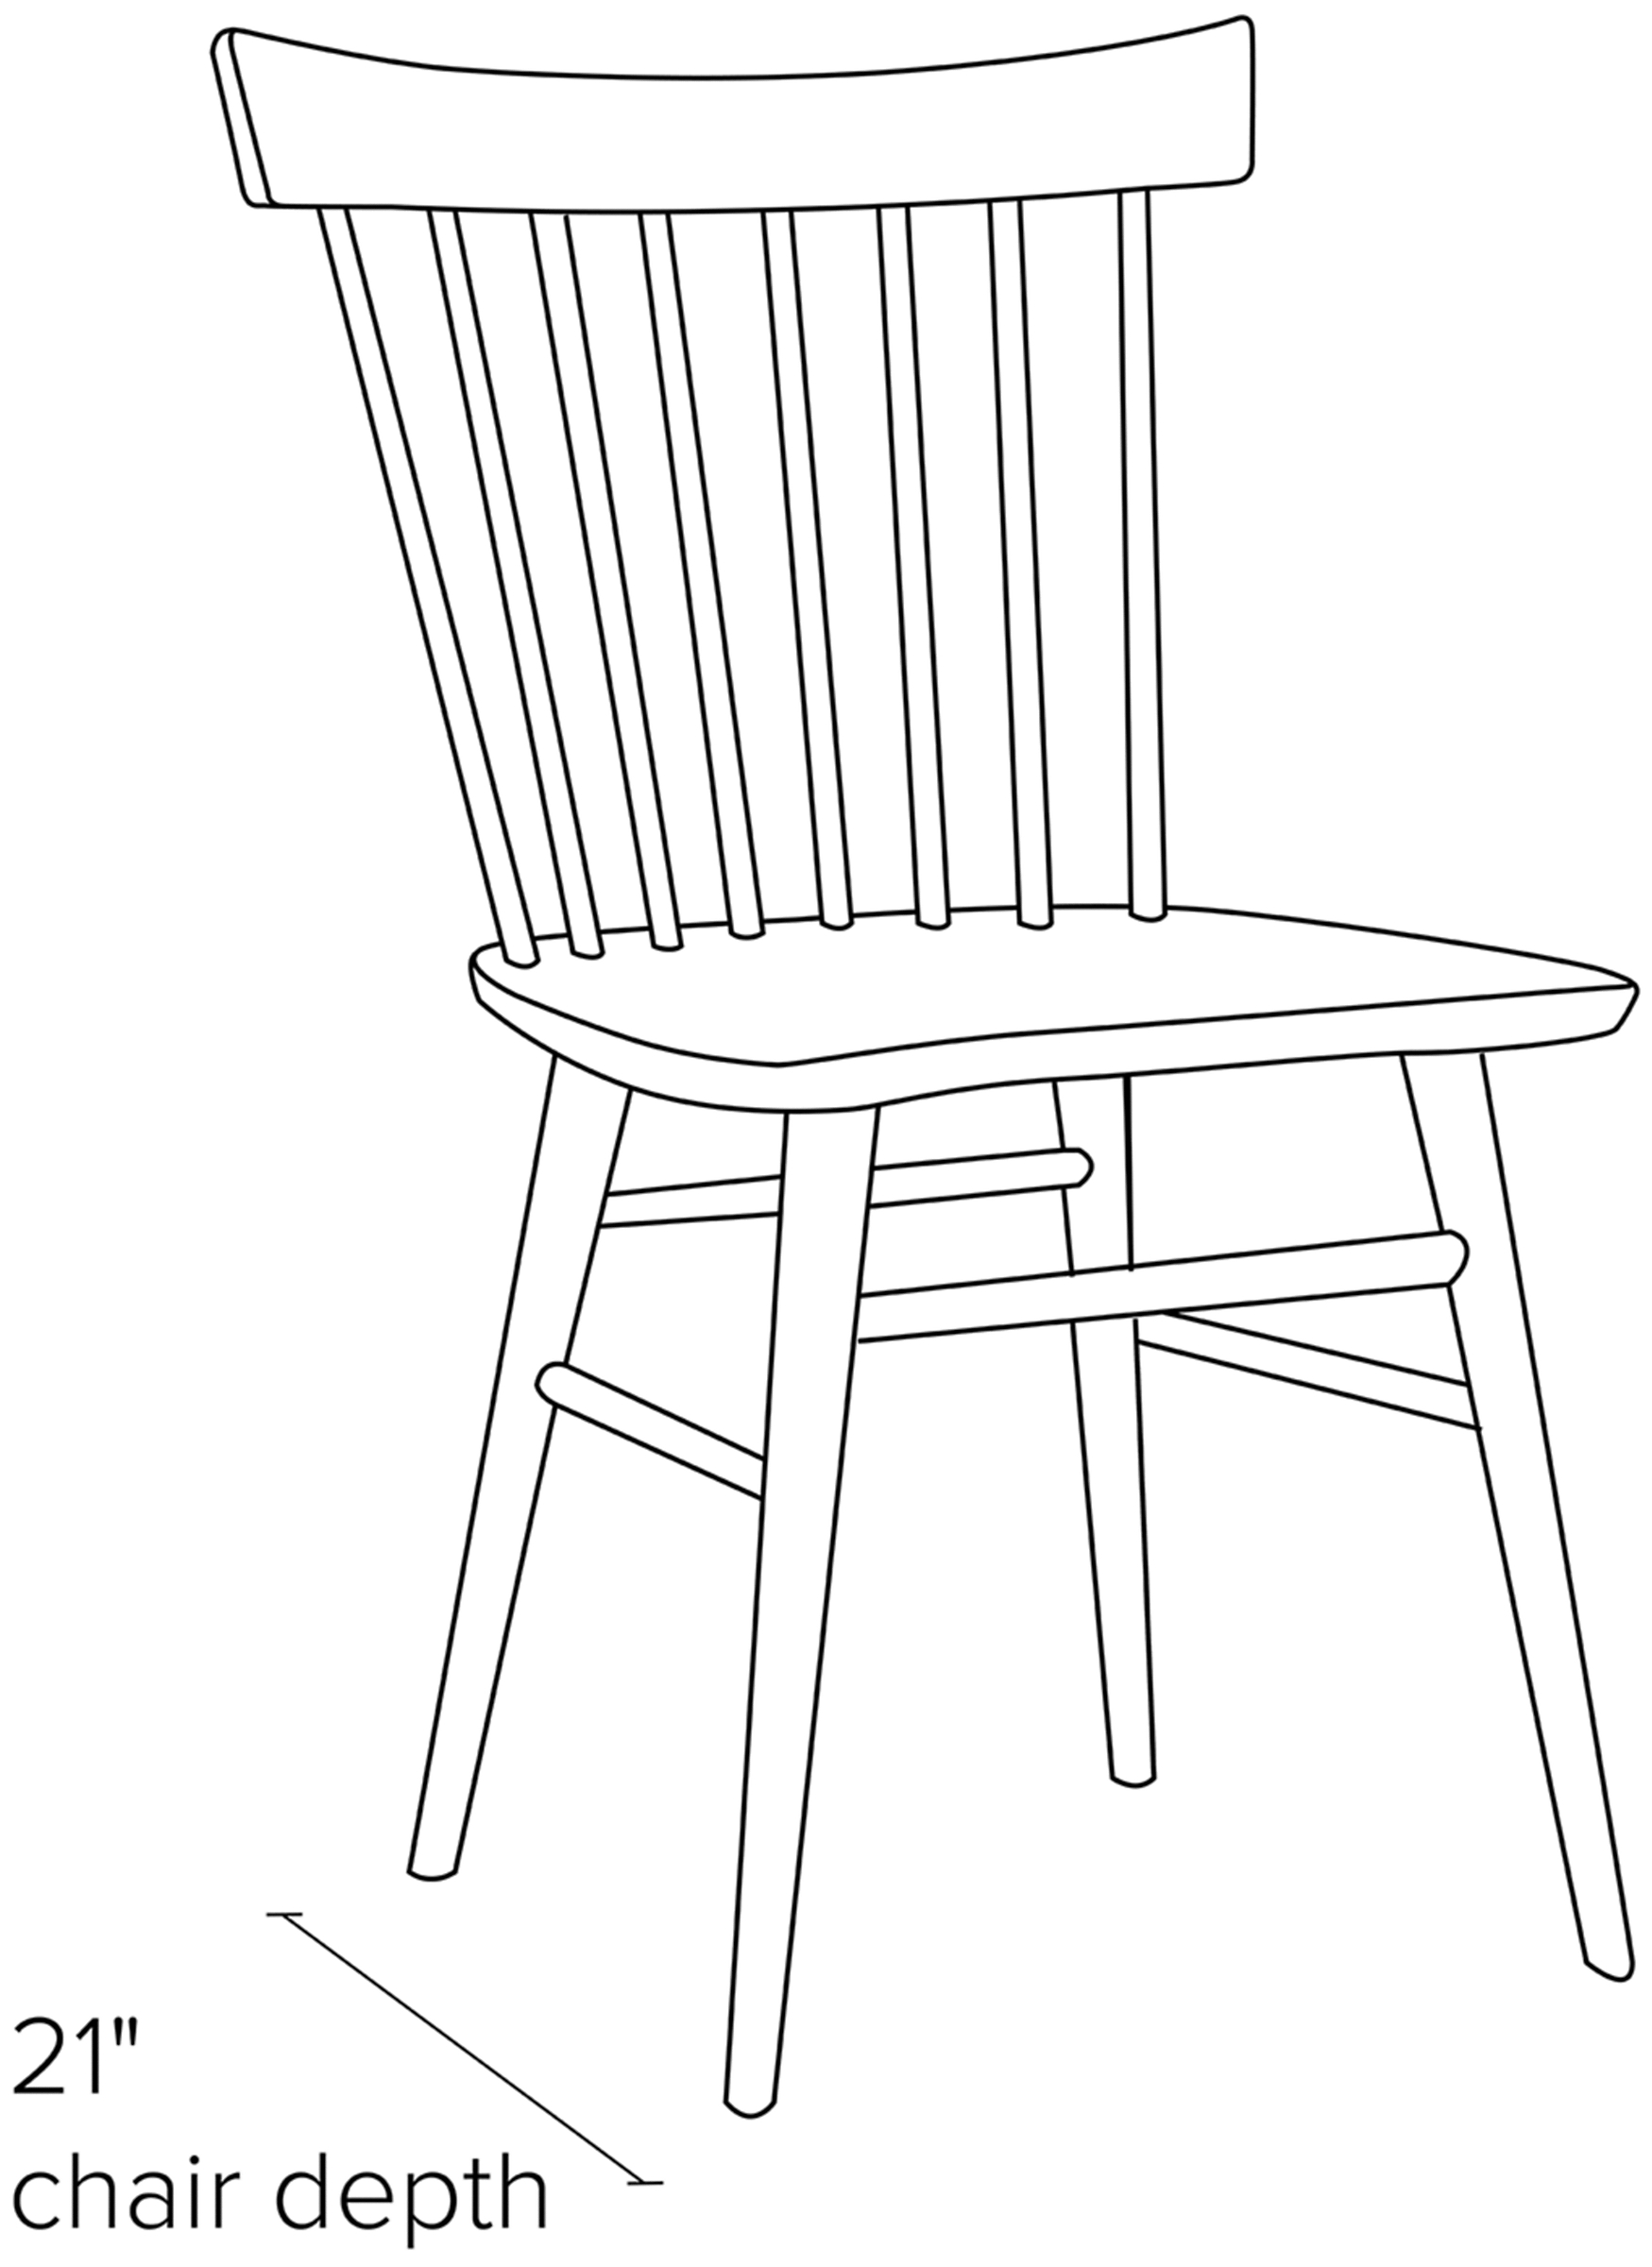 Side view dimension illustration of Thatcher side chair.